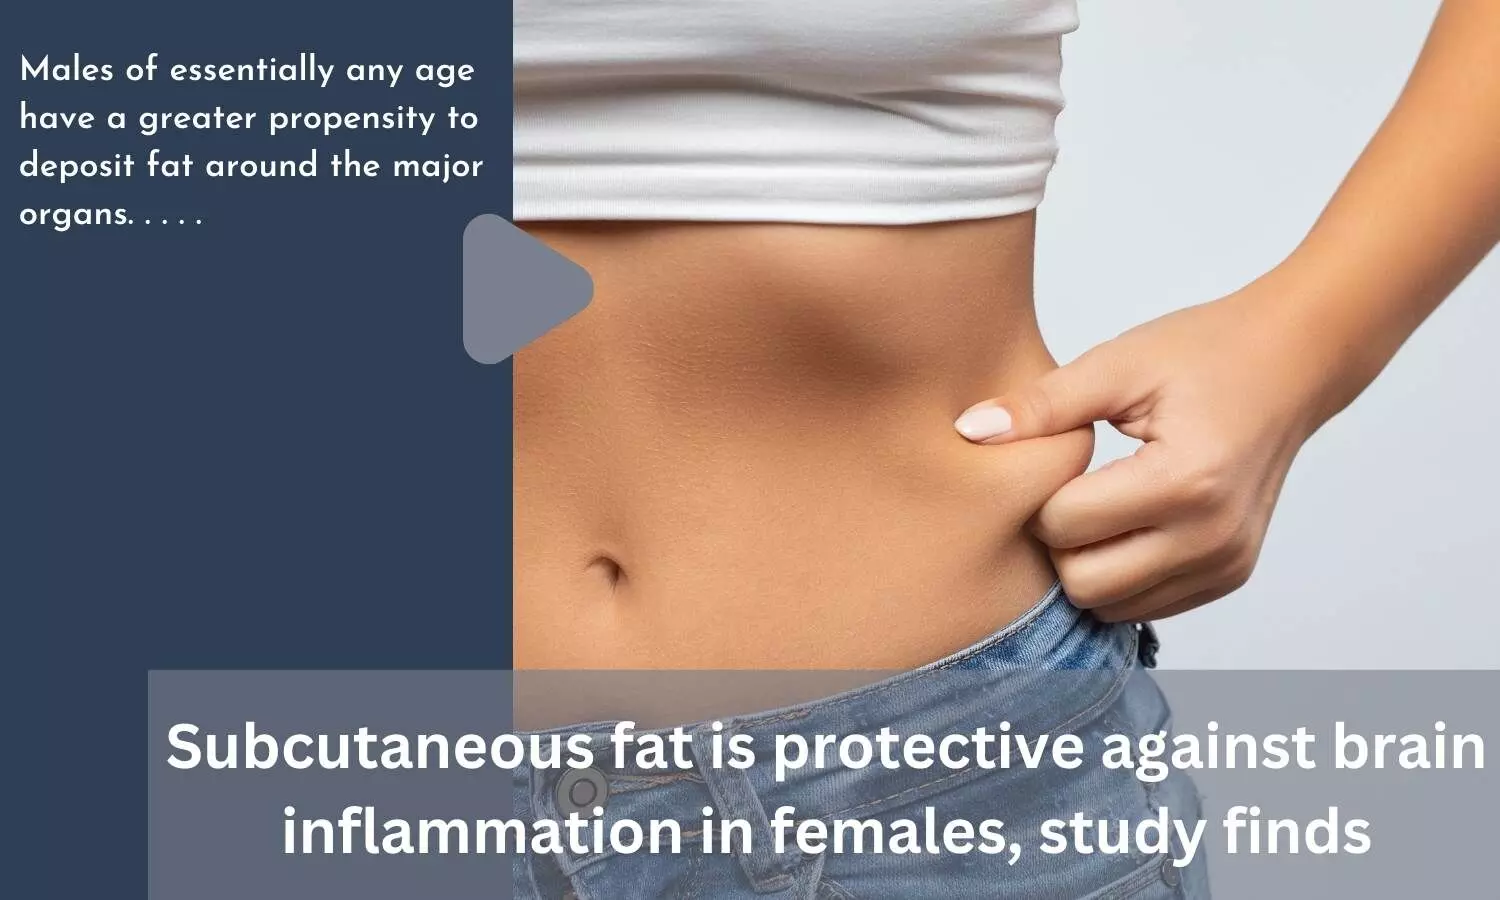 Subcutaneous fat is protective against brain inflammation in females, study finds